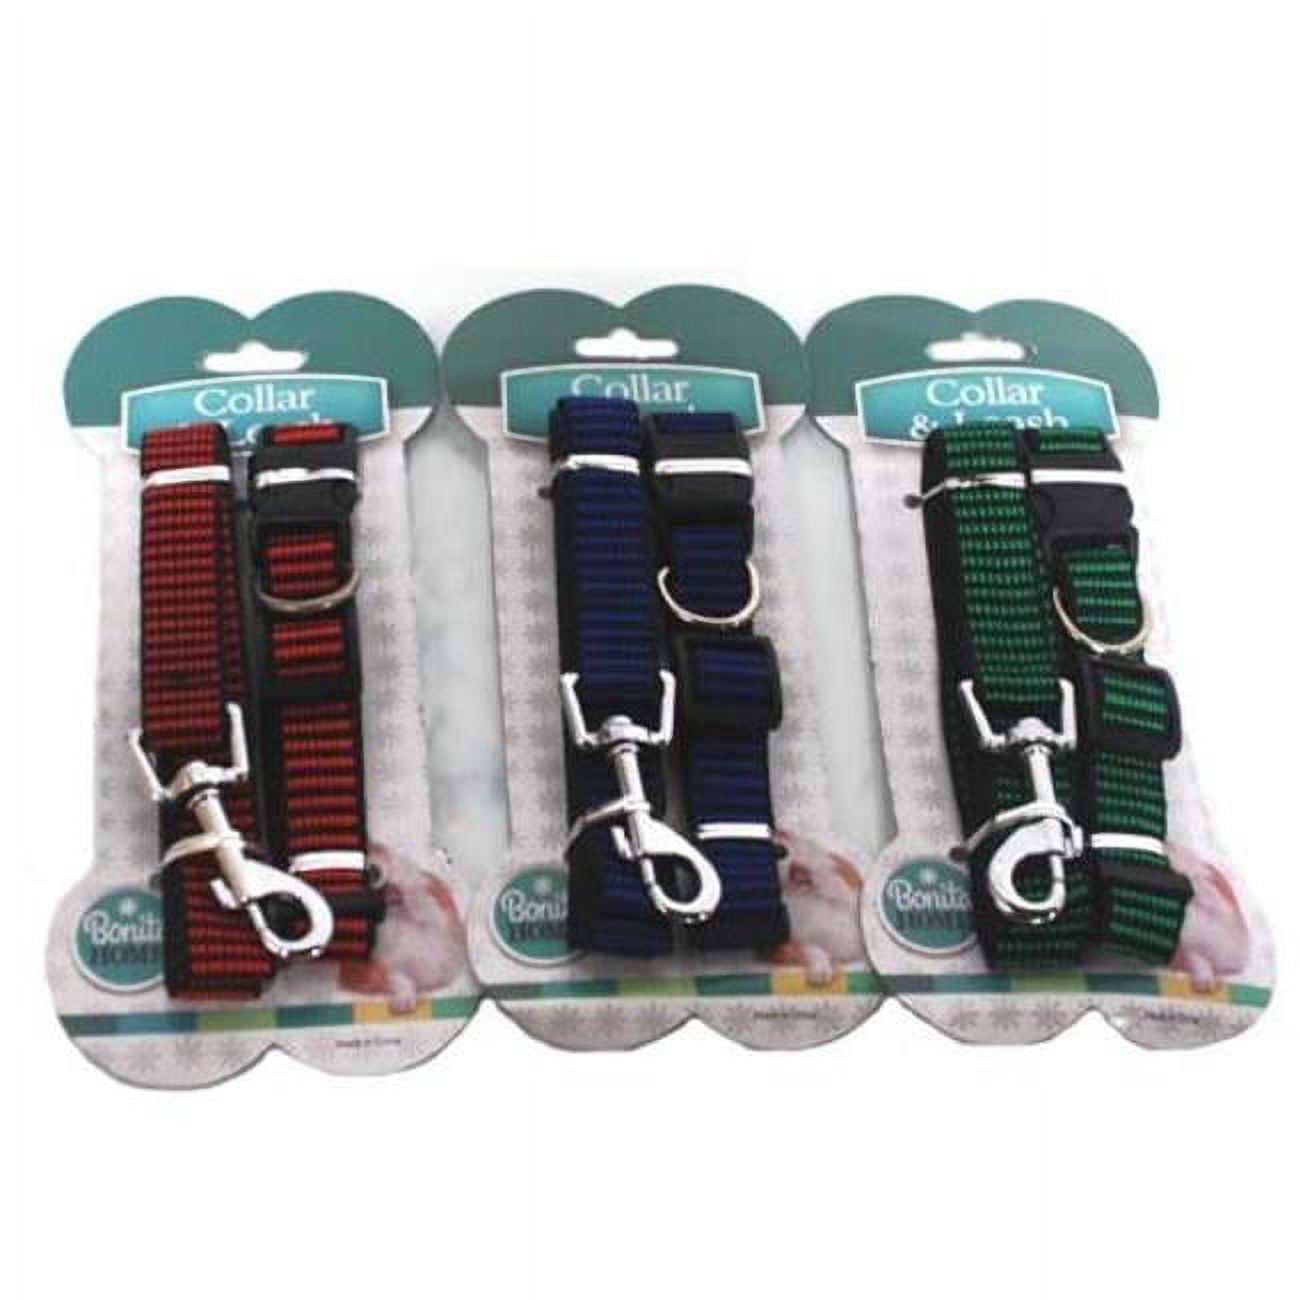 2324601 Leash & Dog Collar, 3 Colors - Case Of 48